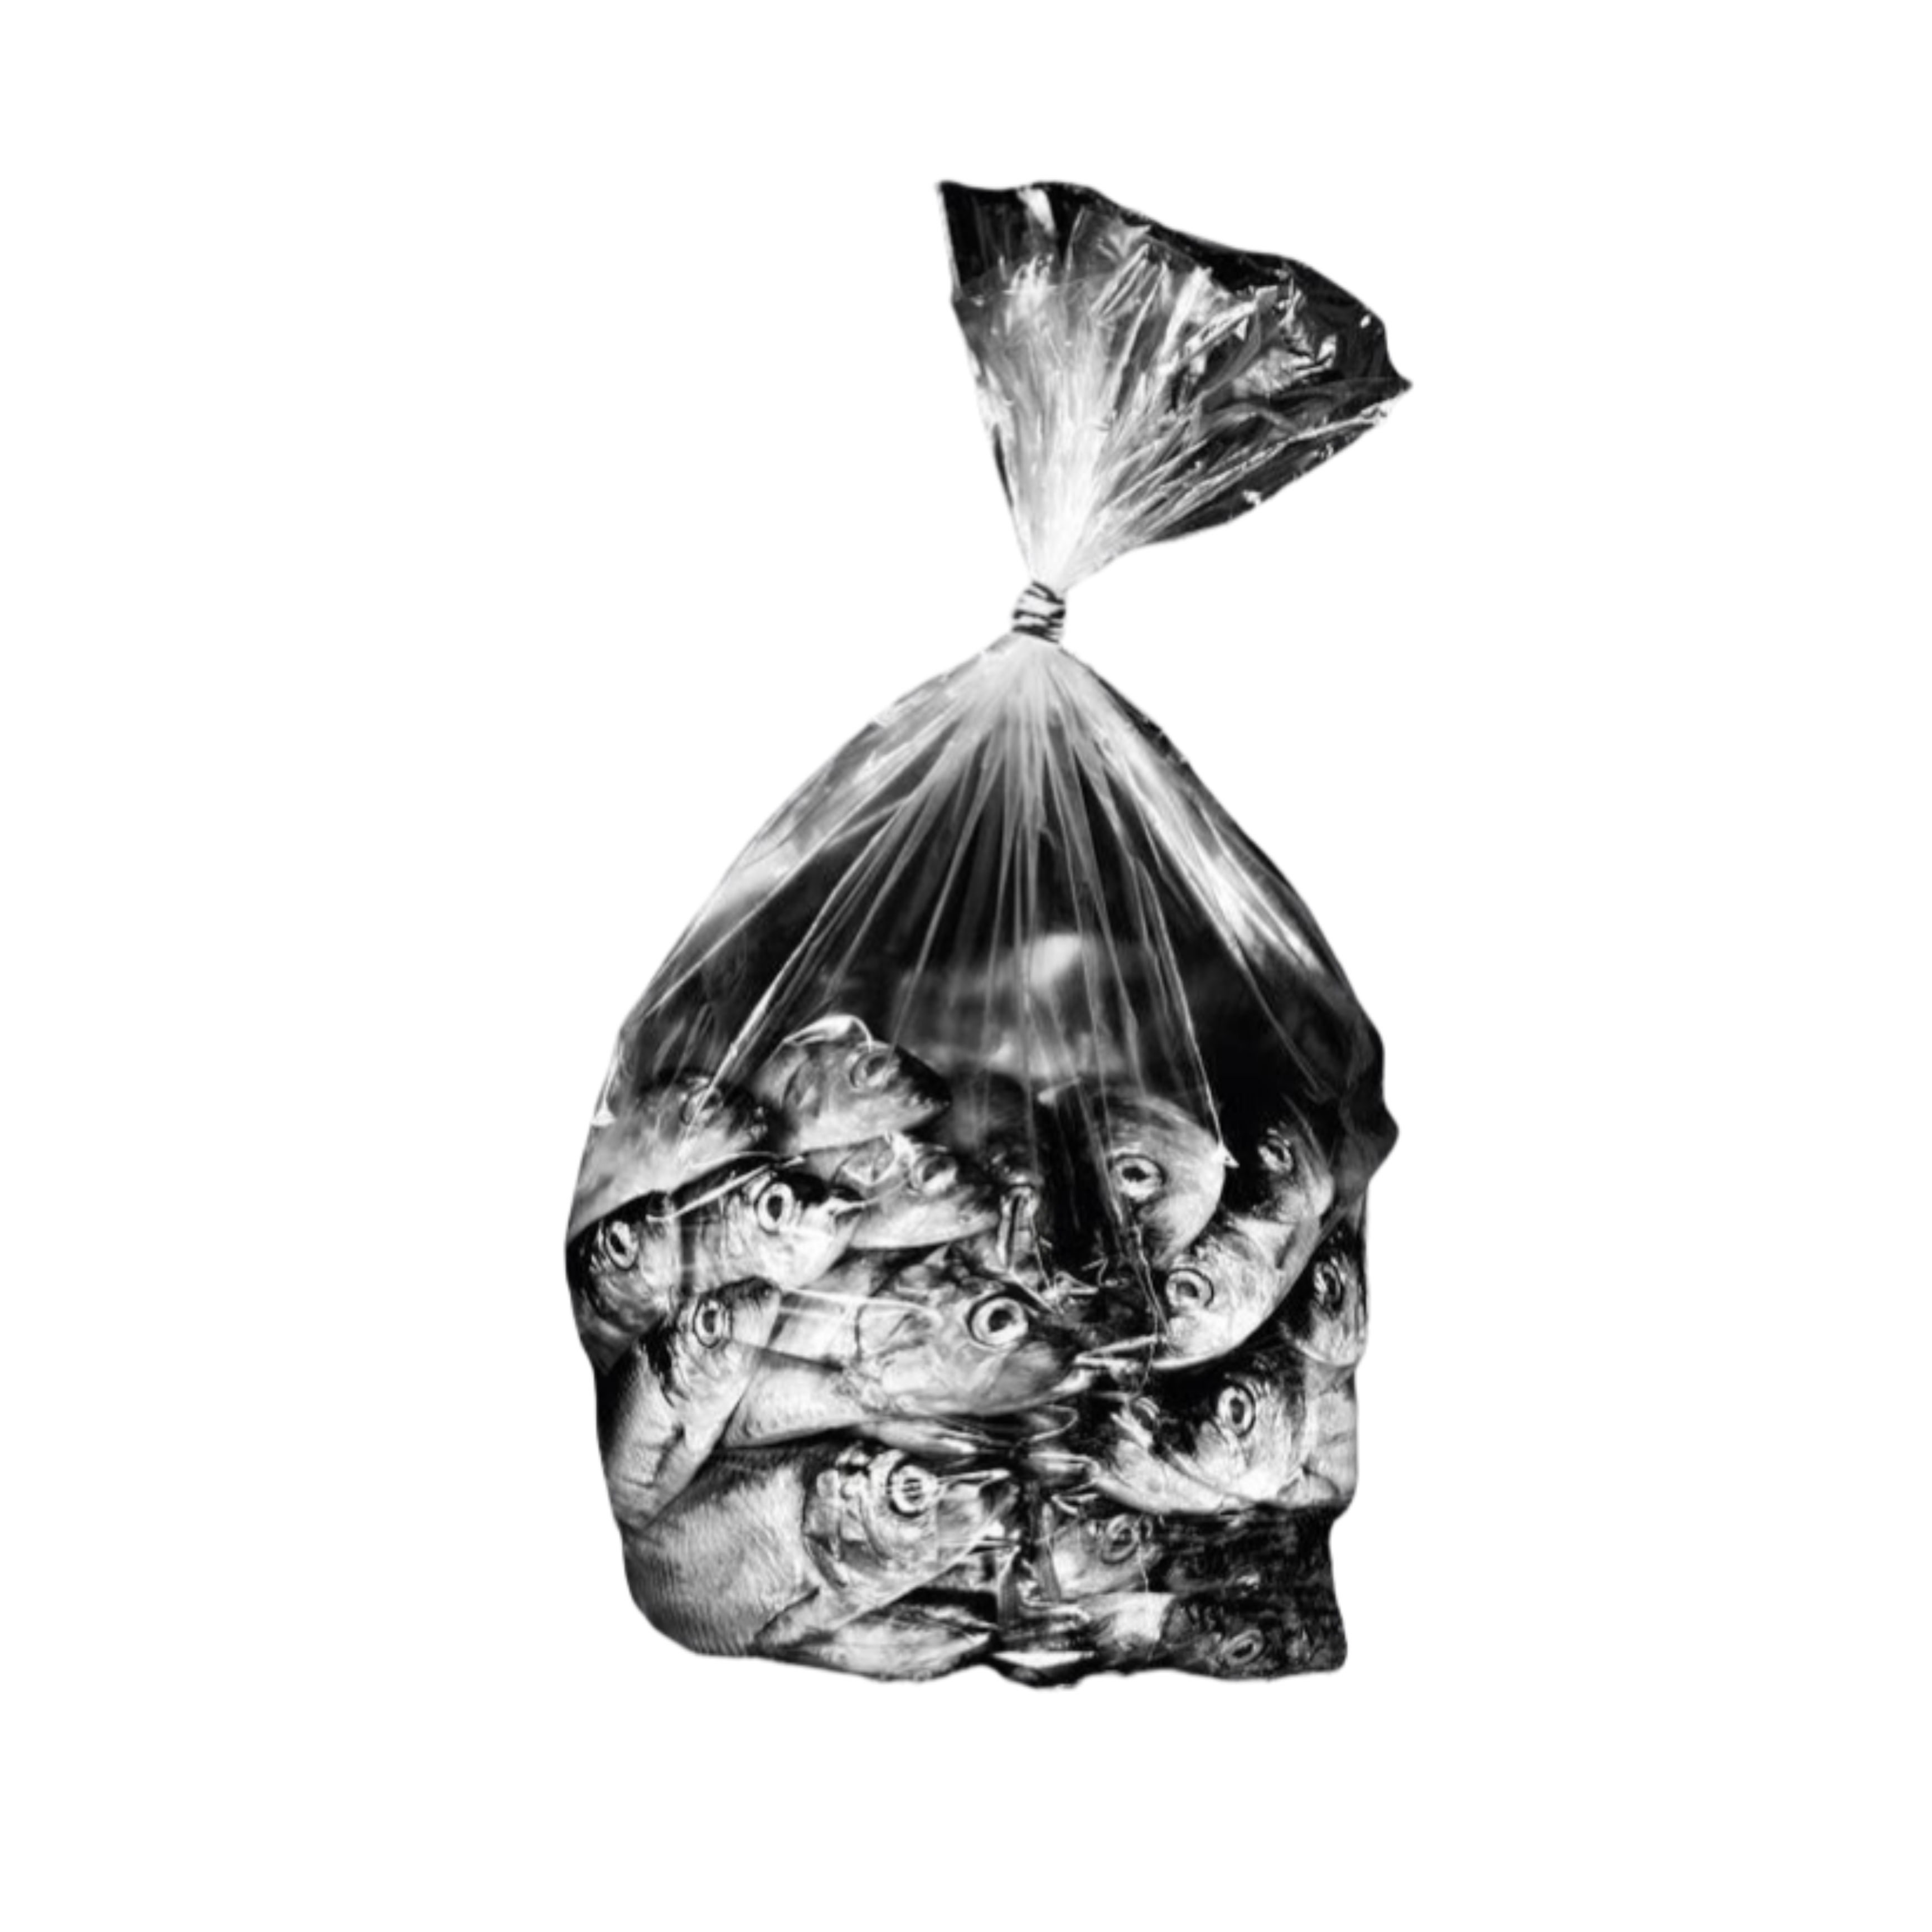 Bag of fish Png by confusedbeantuesday on DeviantArt